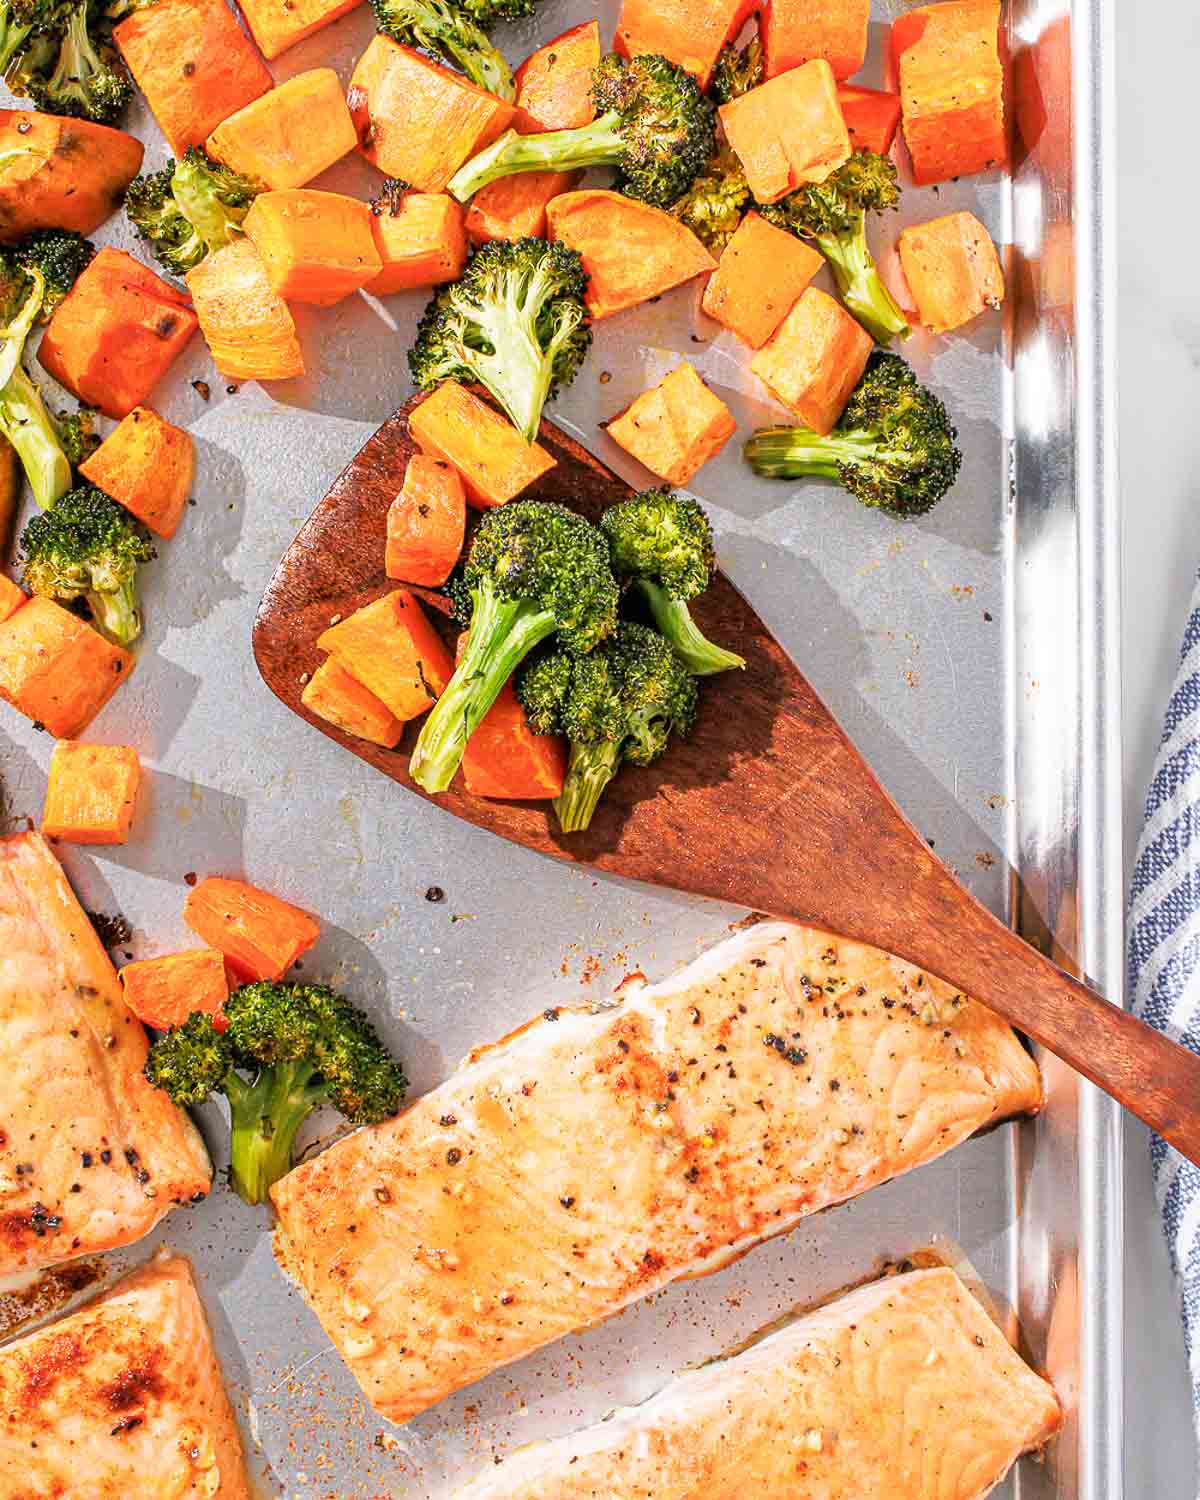 Salmon and vegetables on a baking sheet.